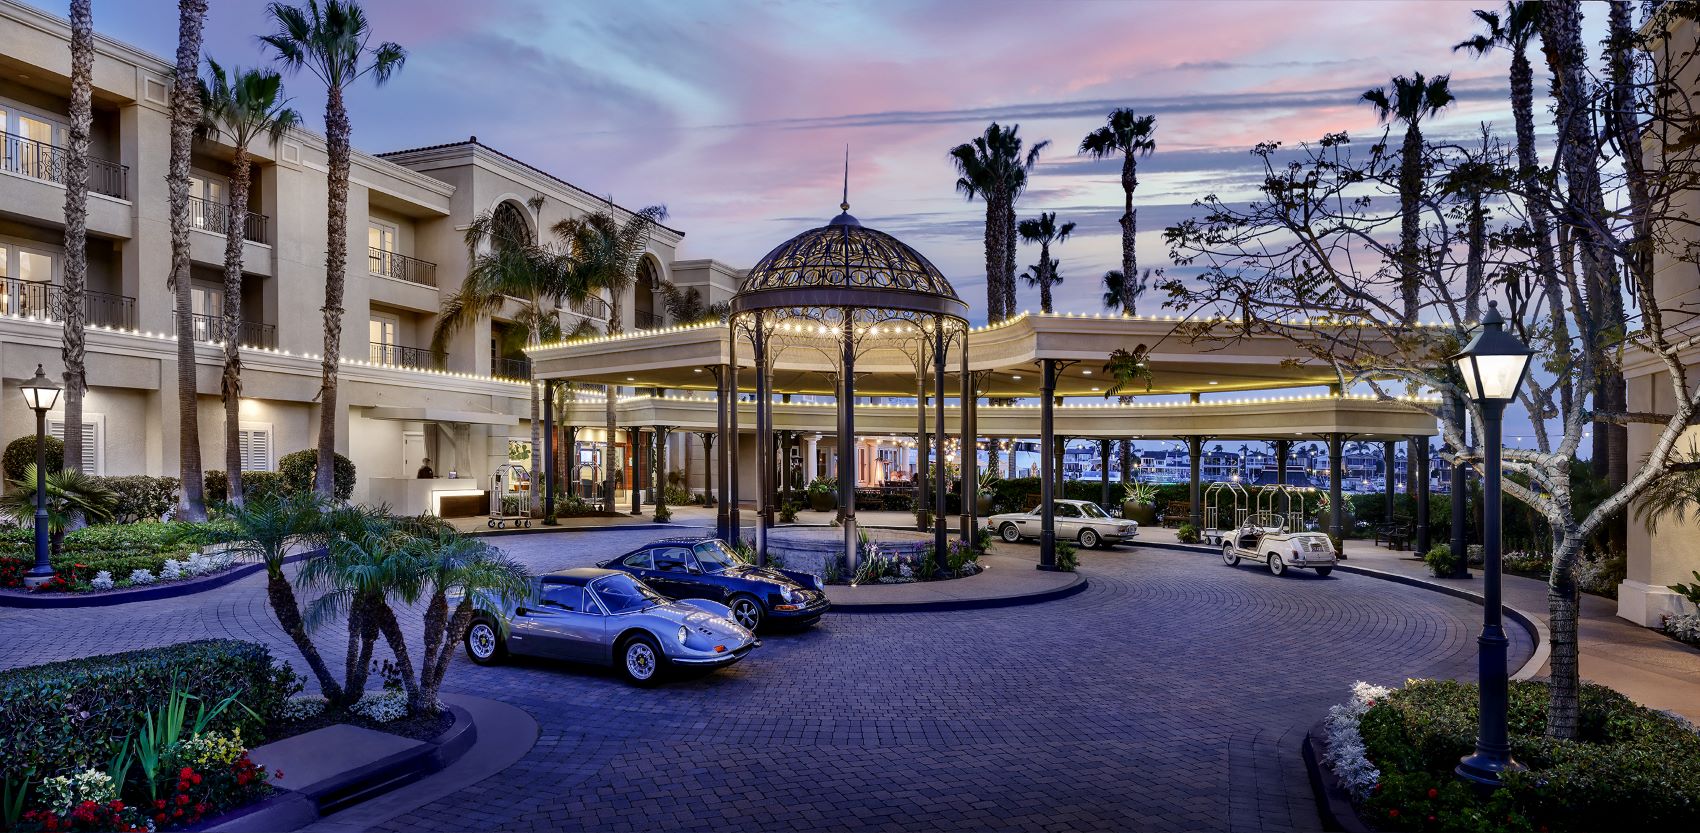 An image of the outside of Balboa Bay Resort